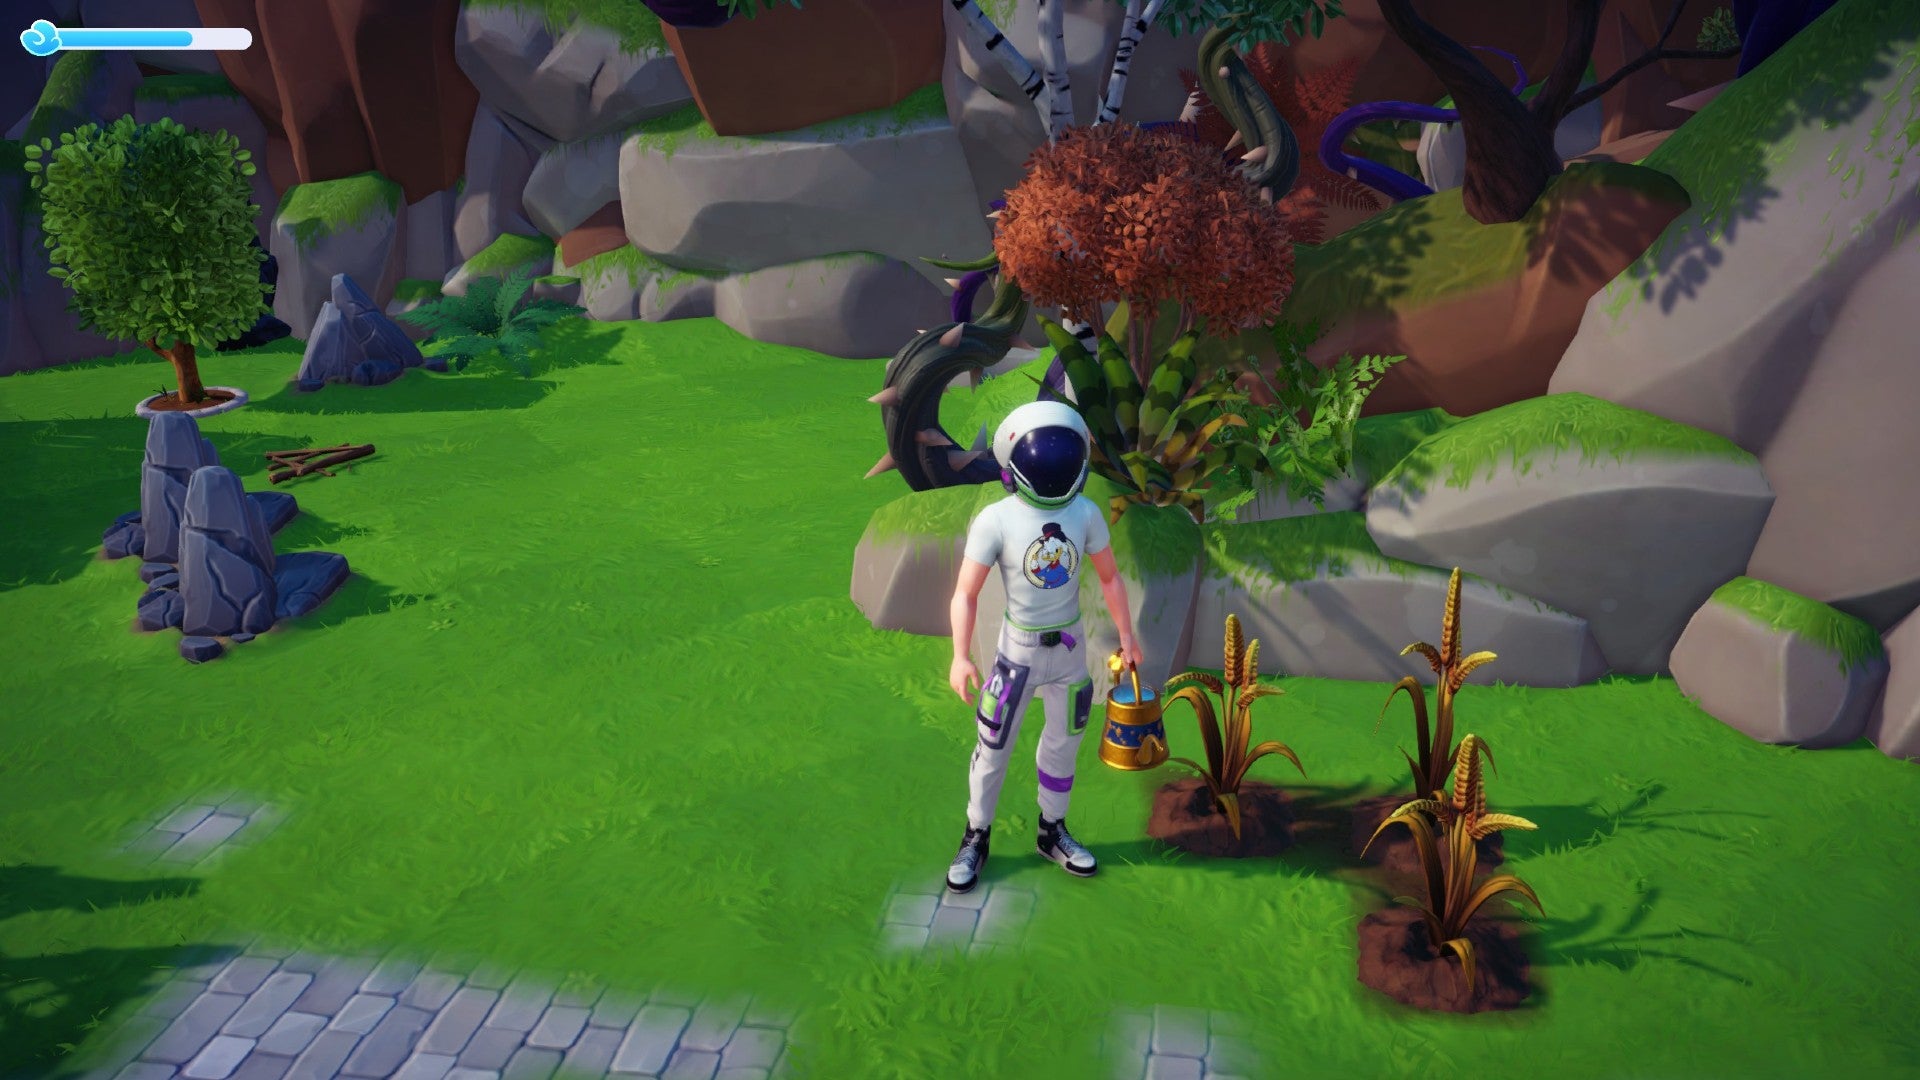 Disney Dreamlight Valley screenshot showing a character wearing a Buzz Lightyear helmet next to some wheat plants on a patch of grass beside a stone path.